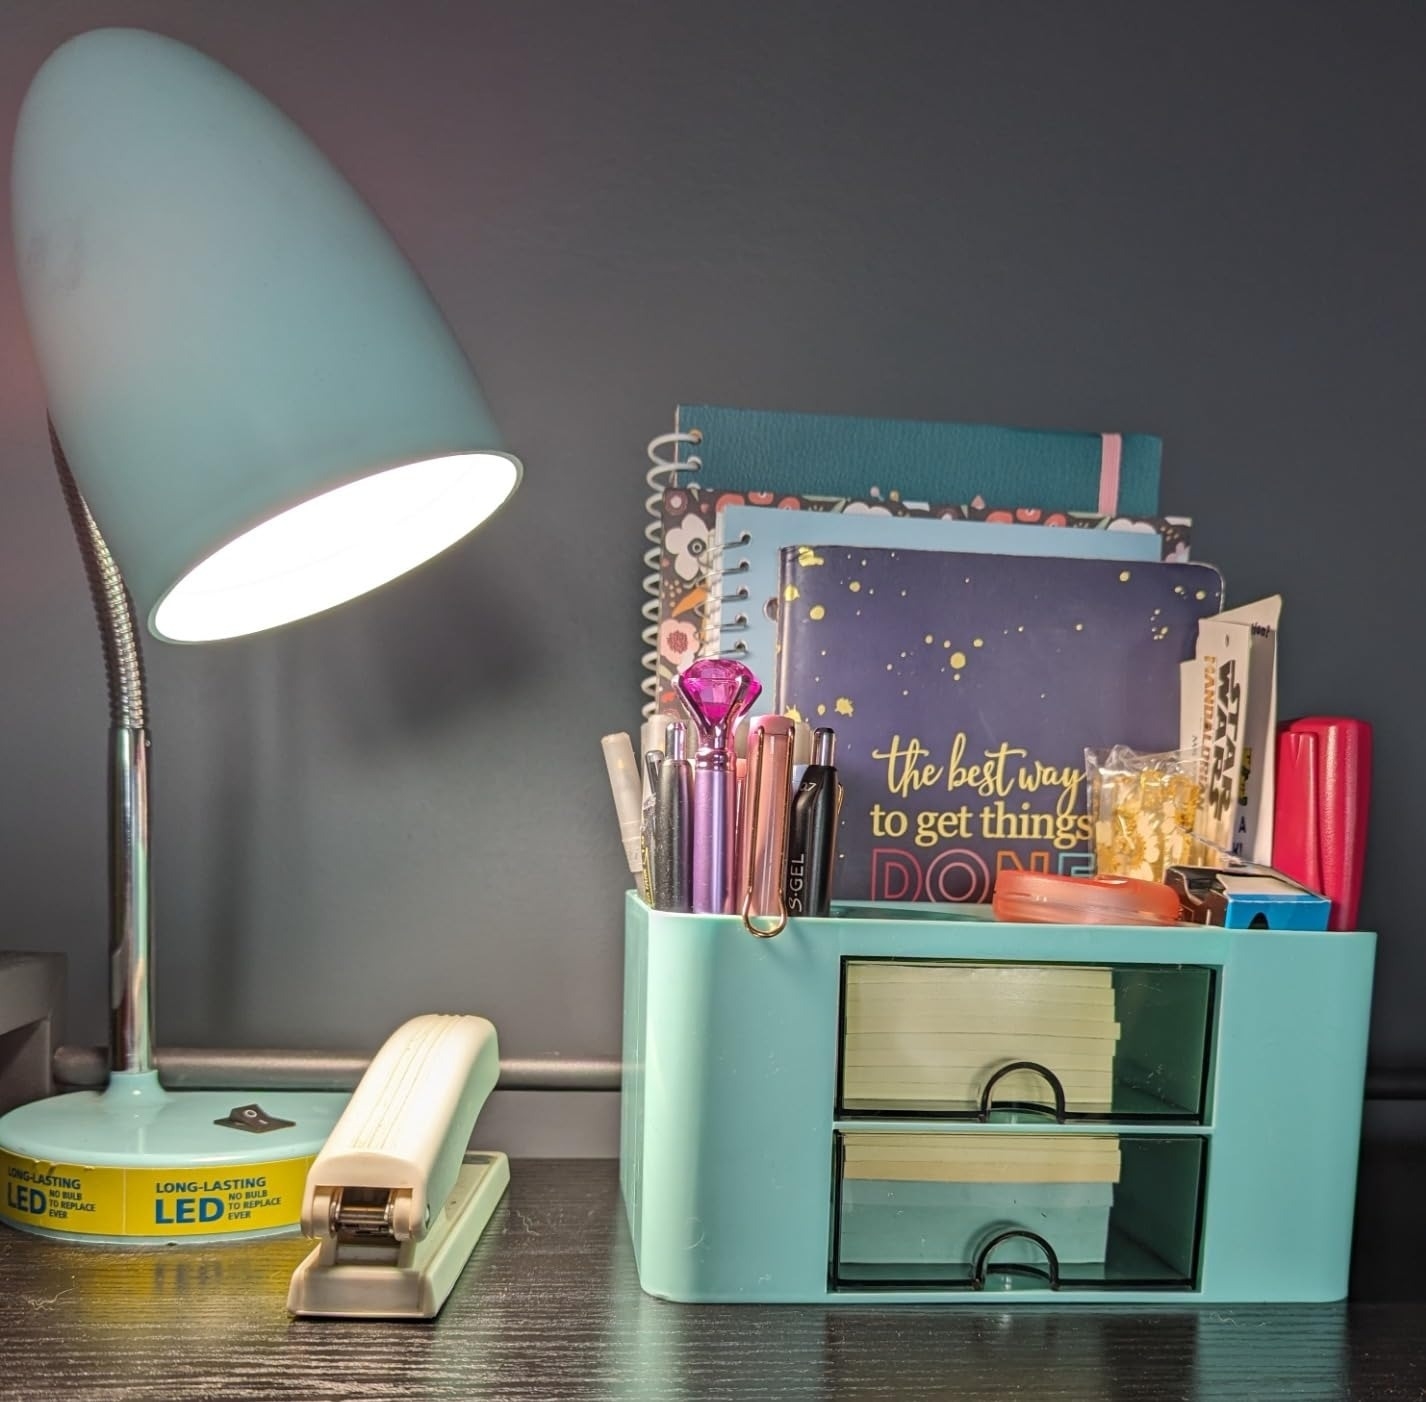 a reviewer photo of the aqua blue desk organizer with stationery, sticky notes, lamp, and planner